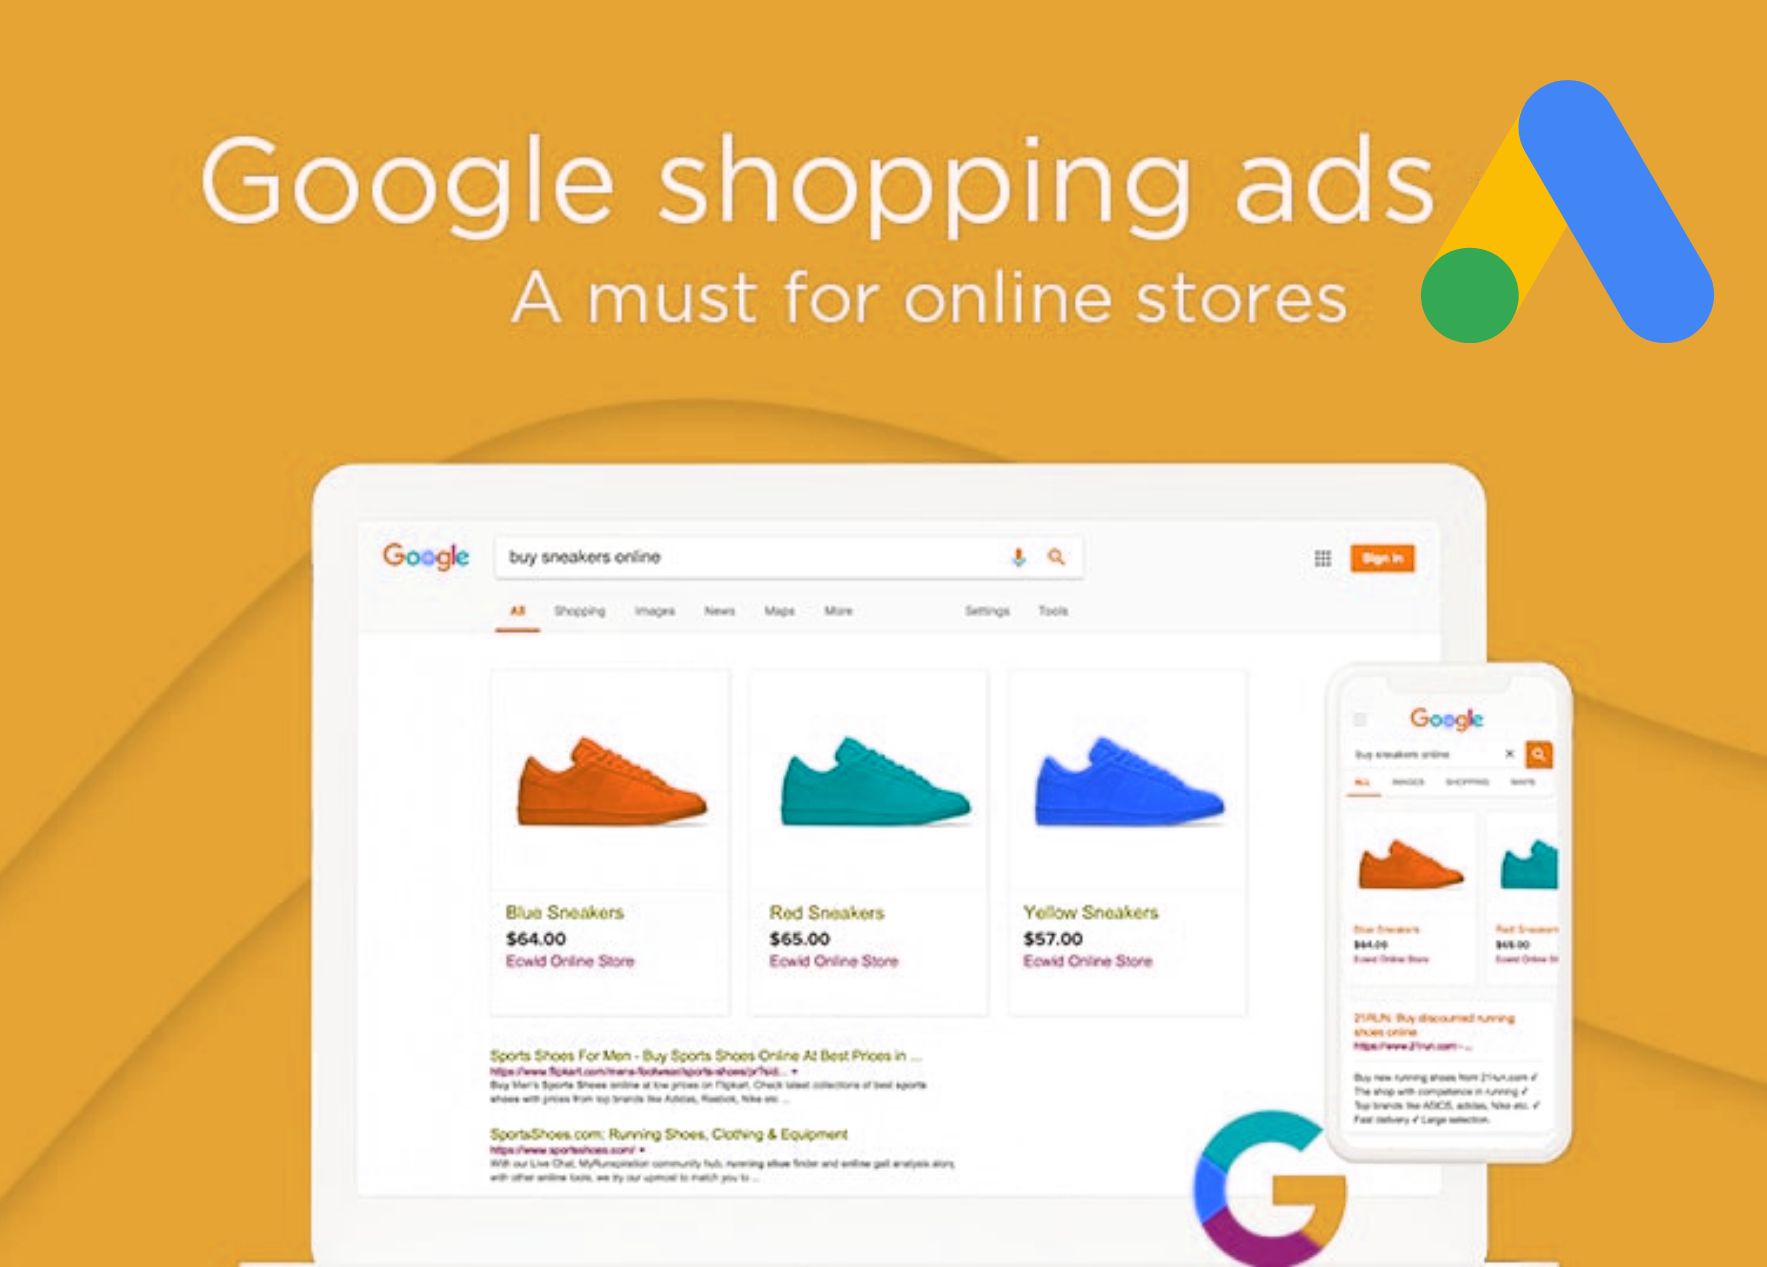 Google Shopping Ads, a must for online stores